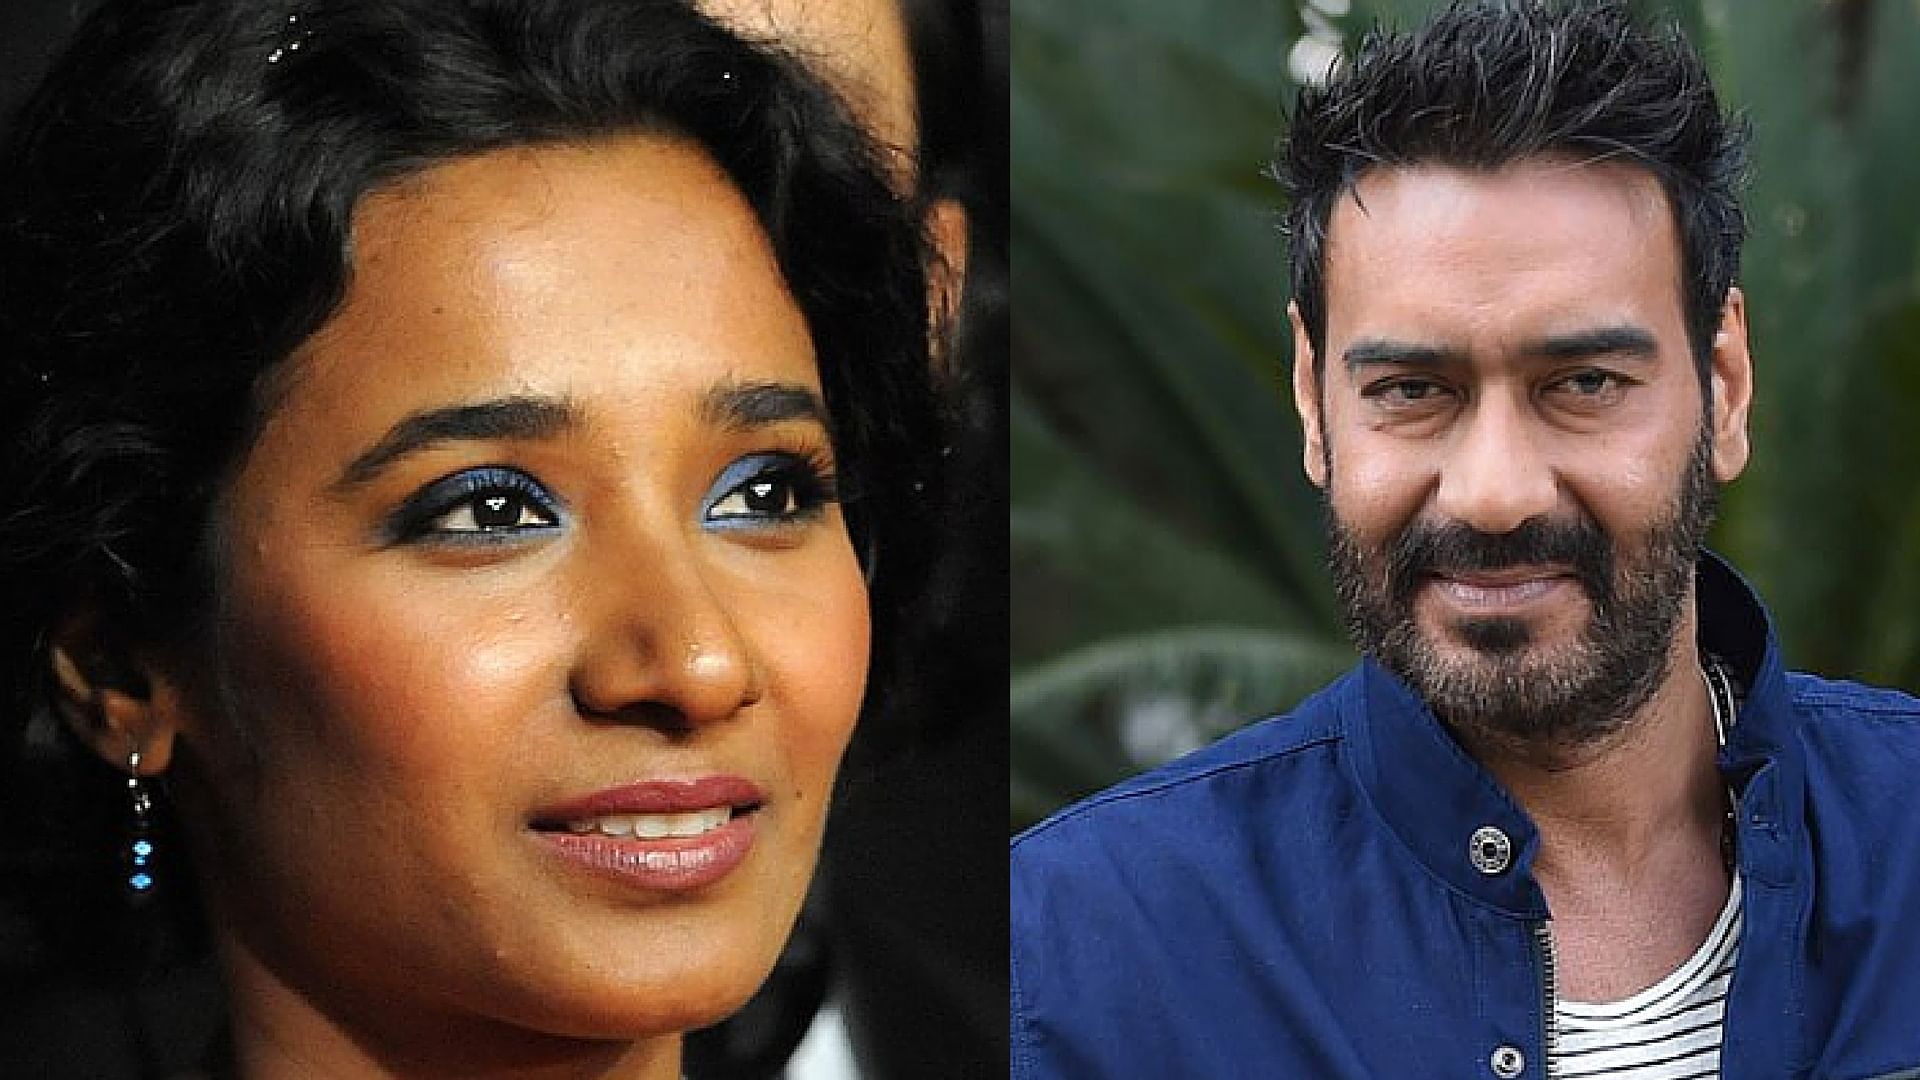  Ajay Devgn shows support to Tannishtha Chatterjee after the <i>Comedy Nights Bachao</i> fiasco. ( Photo courtesy: Twitter/@<a href="https://twitter.com/TannishthaC">TannishthaC</a>/ <a href="https://twitter.com/ajaydevgn">ajaydevgn</a>)